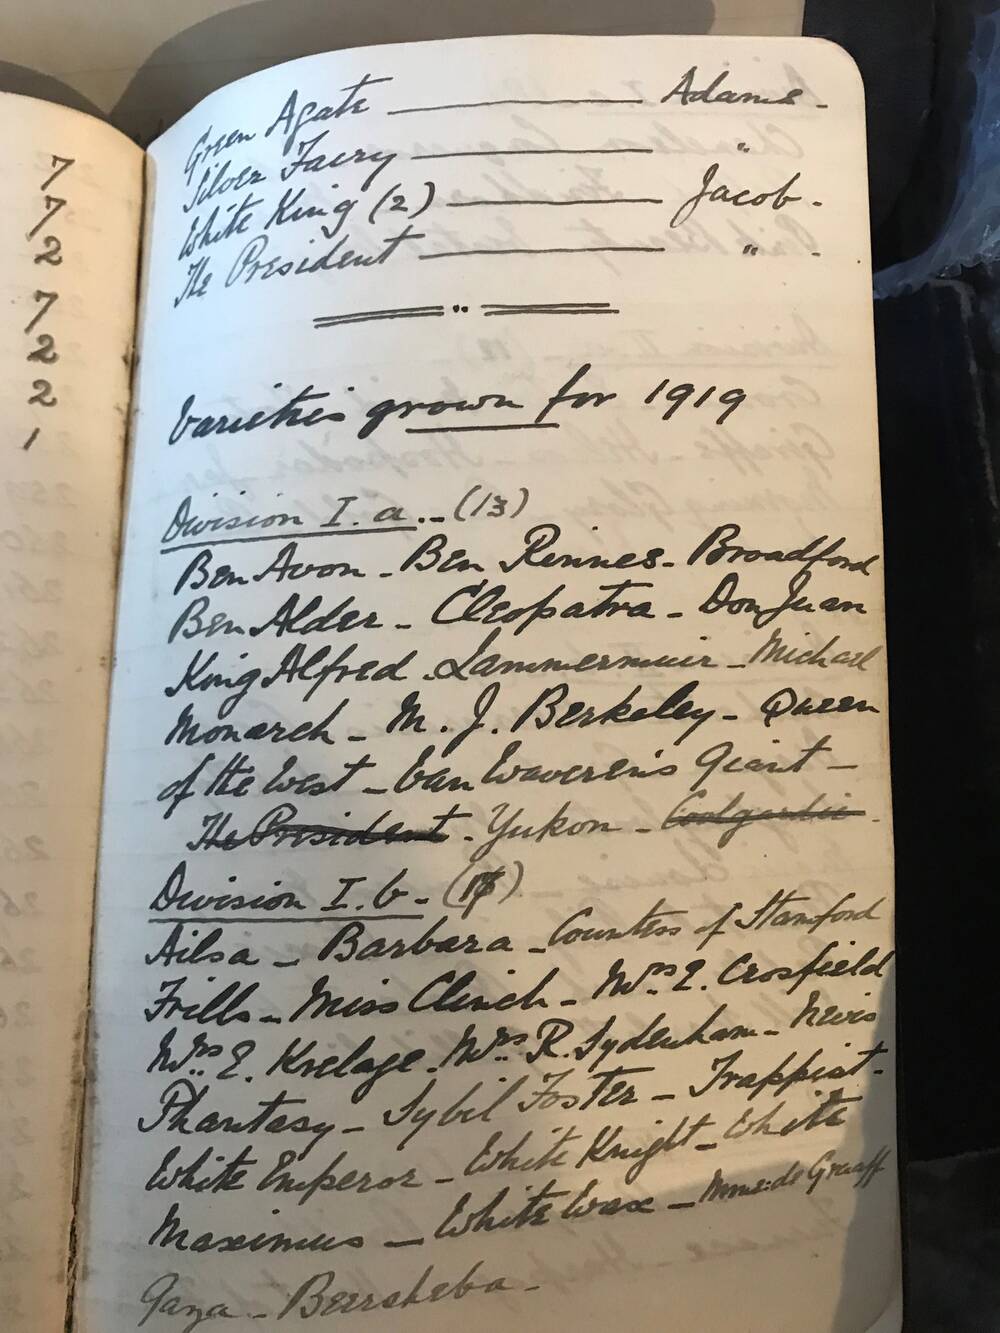 A page of a handwritten logbook describing various daffodils.